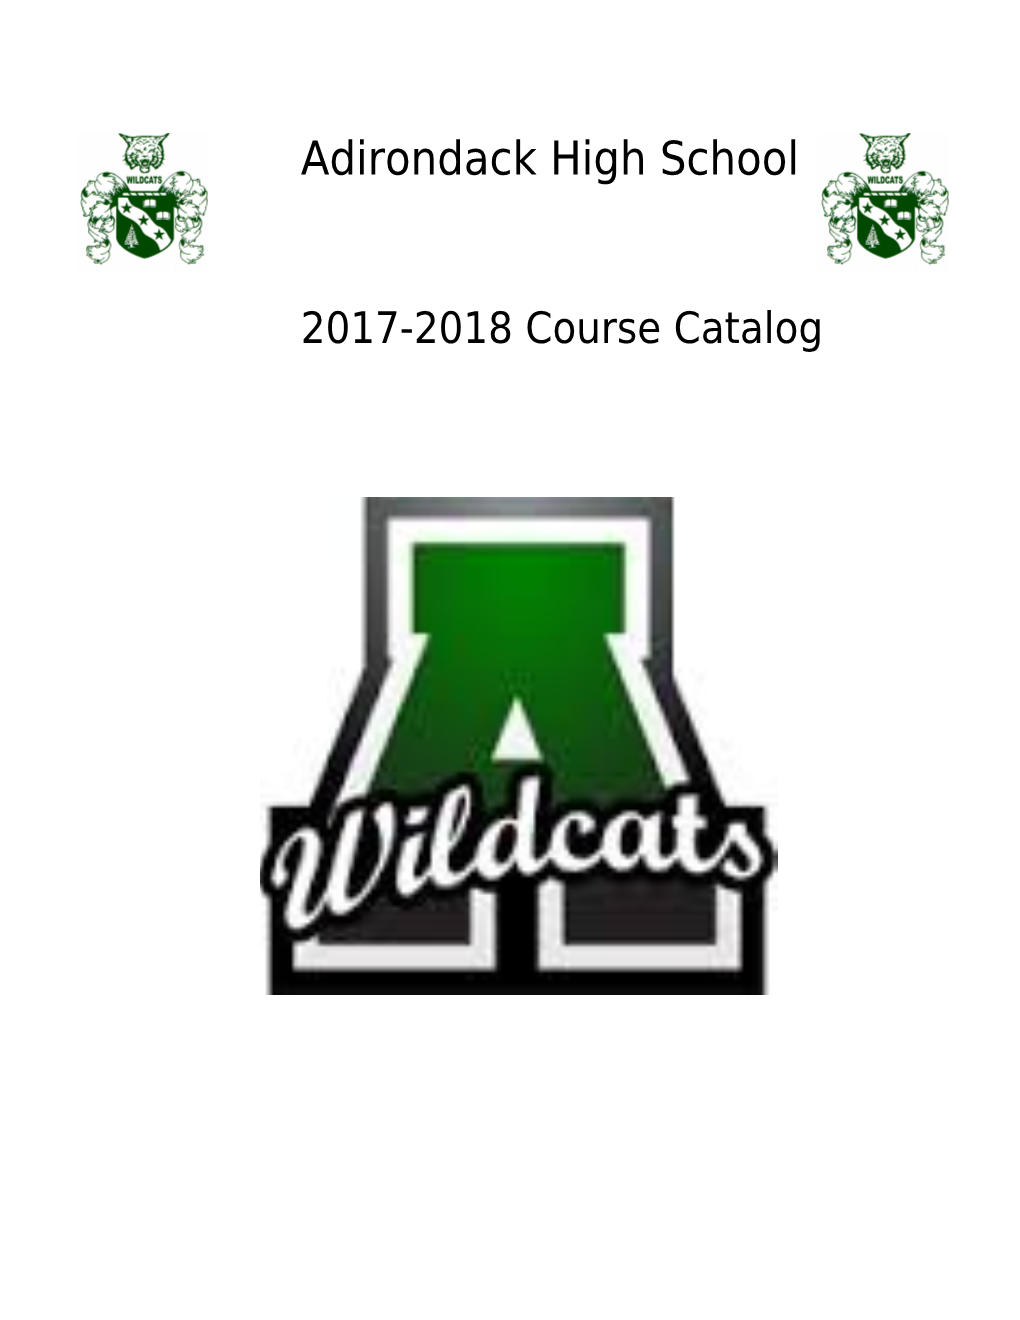 Information for Adirondack High School Students and Their Parents/Guardians